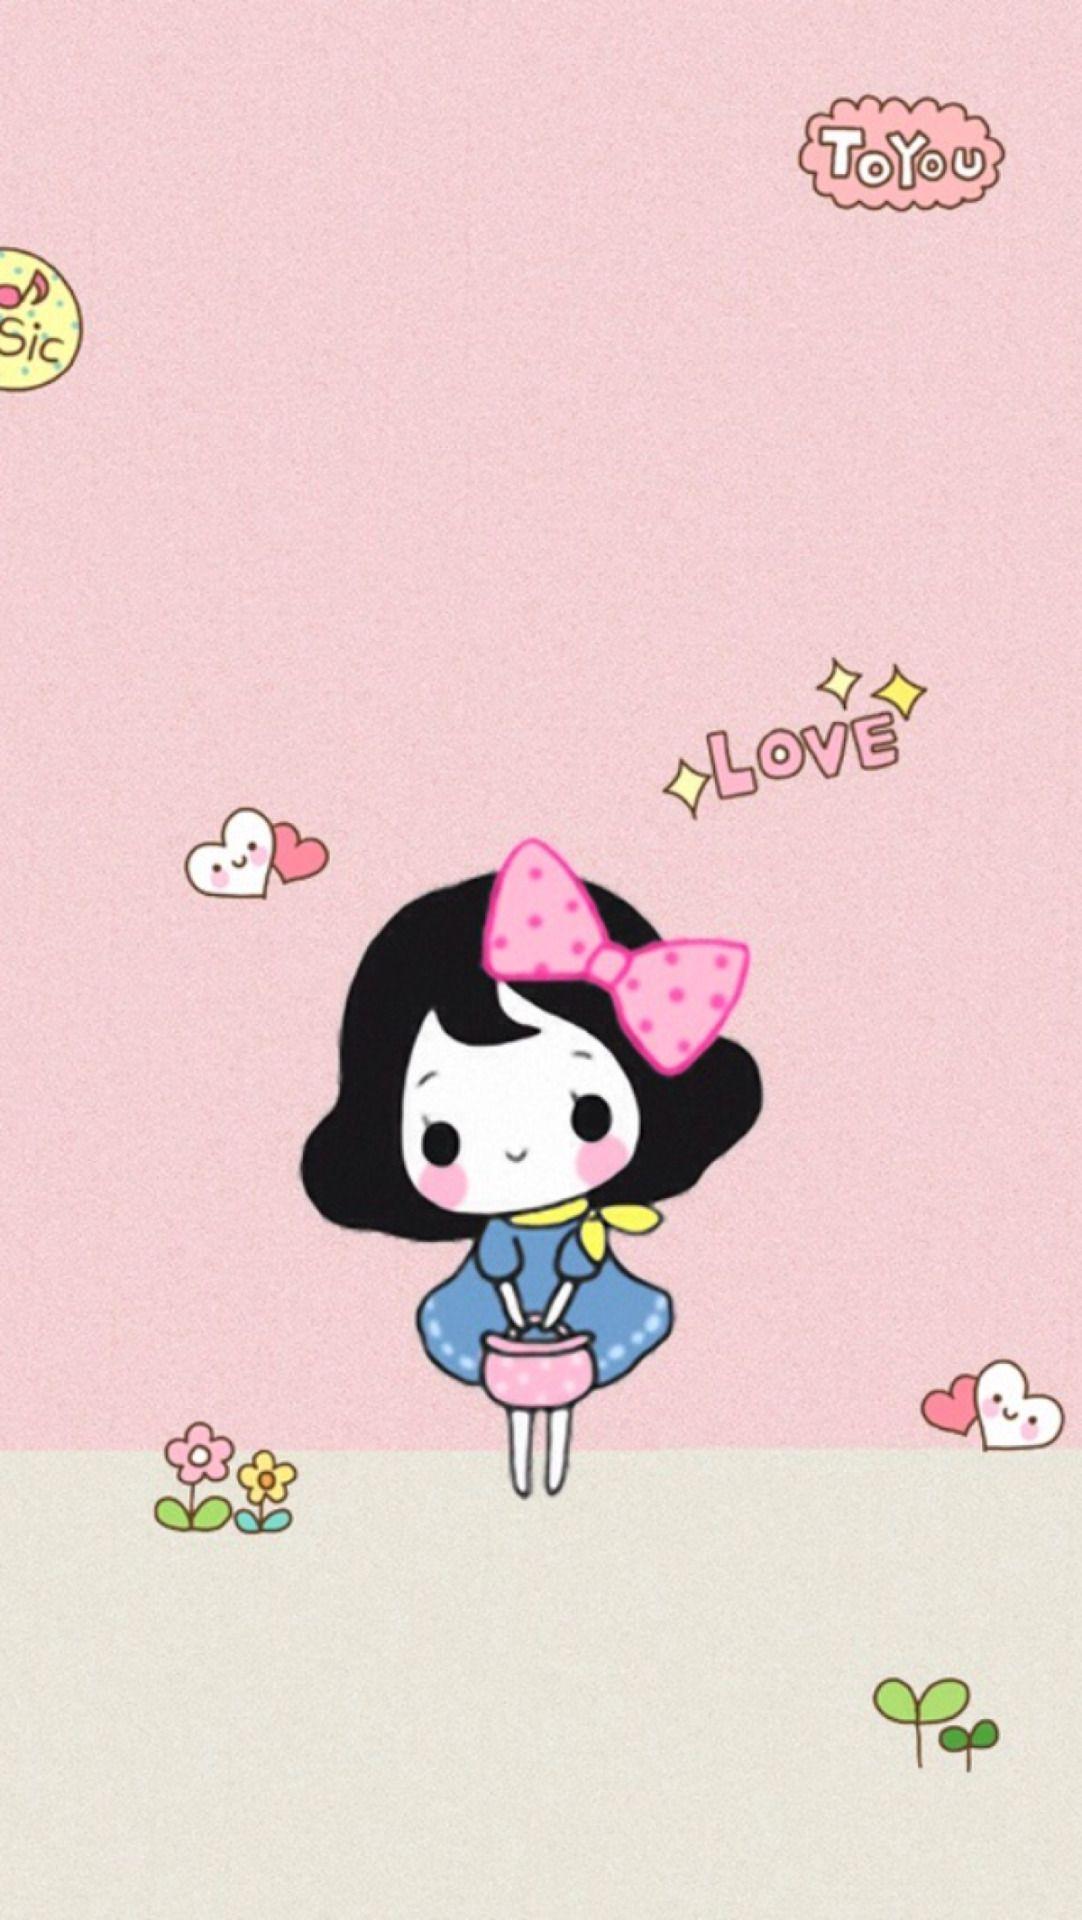 Super Cute Wallpapers For Mobile - Wallpaper Cave